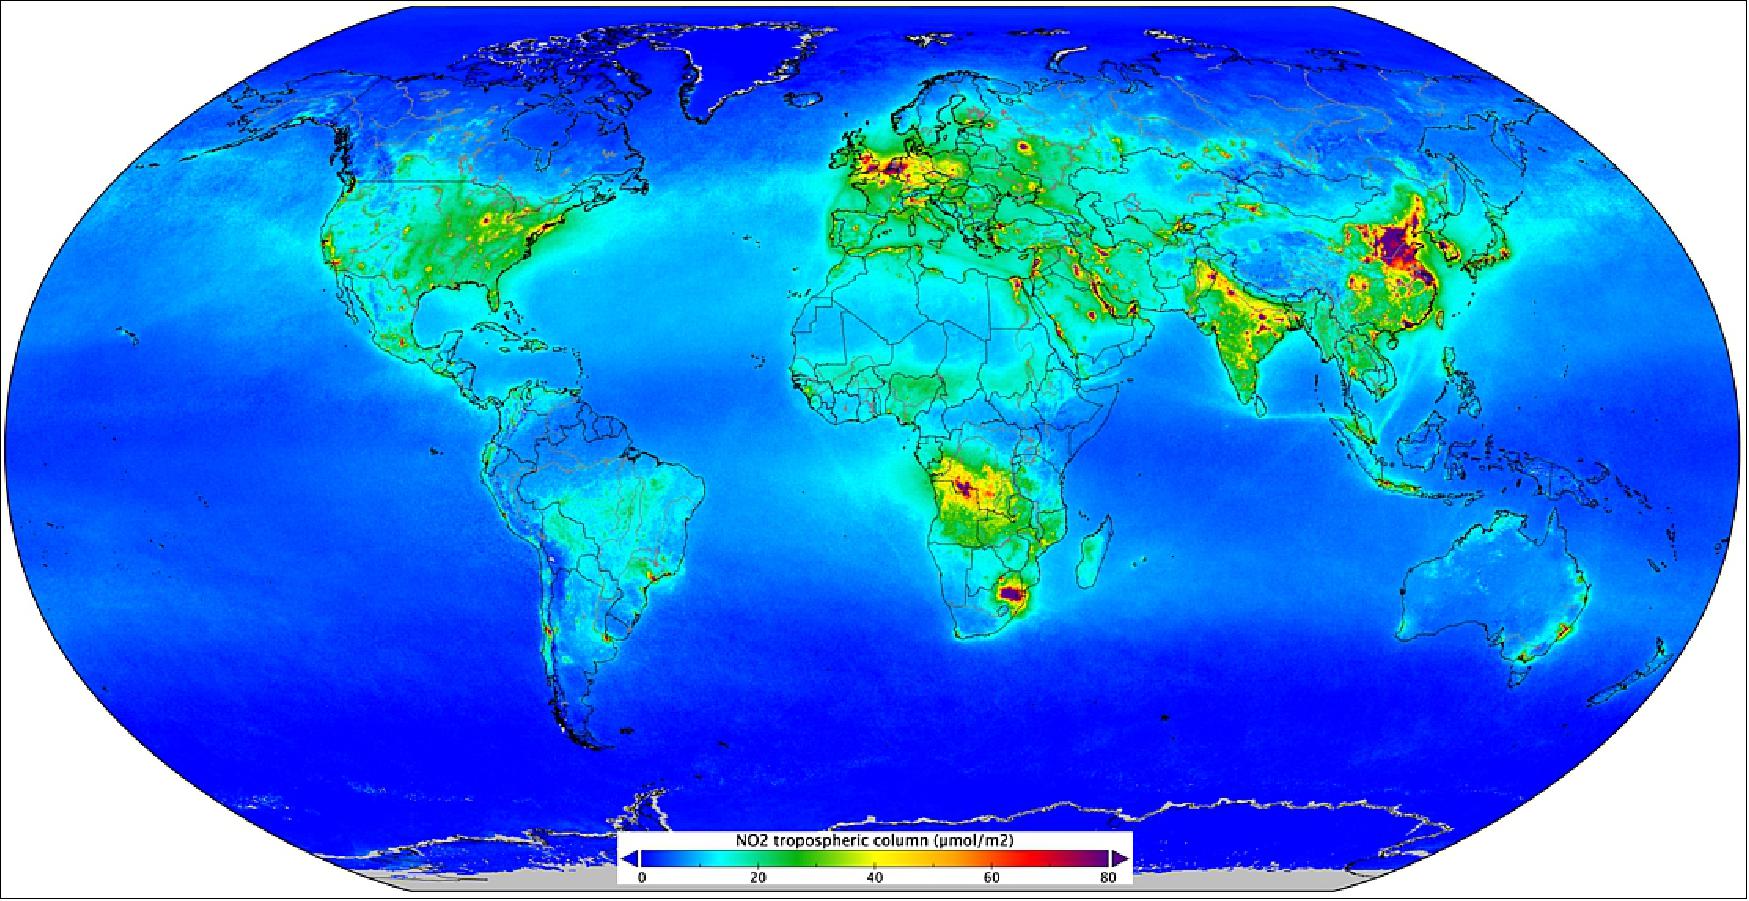 Figure 14: Nitrogen dioxide worldwide: Measurements gathered by the Copernicus Sentinel-5P mission between April and September 2018 have been averaged to reveal nitrogen dioxide in the atmosphere. The data were averaged and gridded on a regular latitude-longitude grid of about 2 x 2 km. Nitrogen dioxide pollutes the air mainly as a result of traffic and the combustion of fossil fuel in industrial processes. It has a significant impact on human health, contributing particularly to respiratory problems (image credit: ESA, the image contains modified Copernicus data (2018), processed by KNMI)